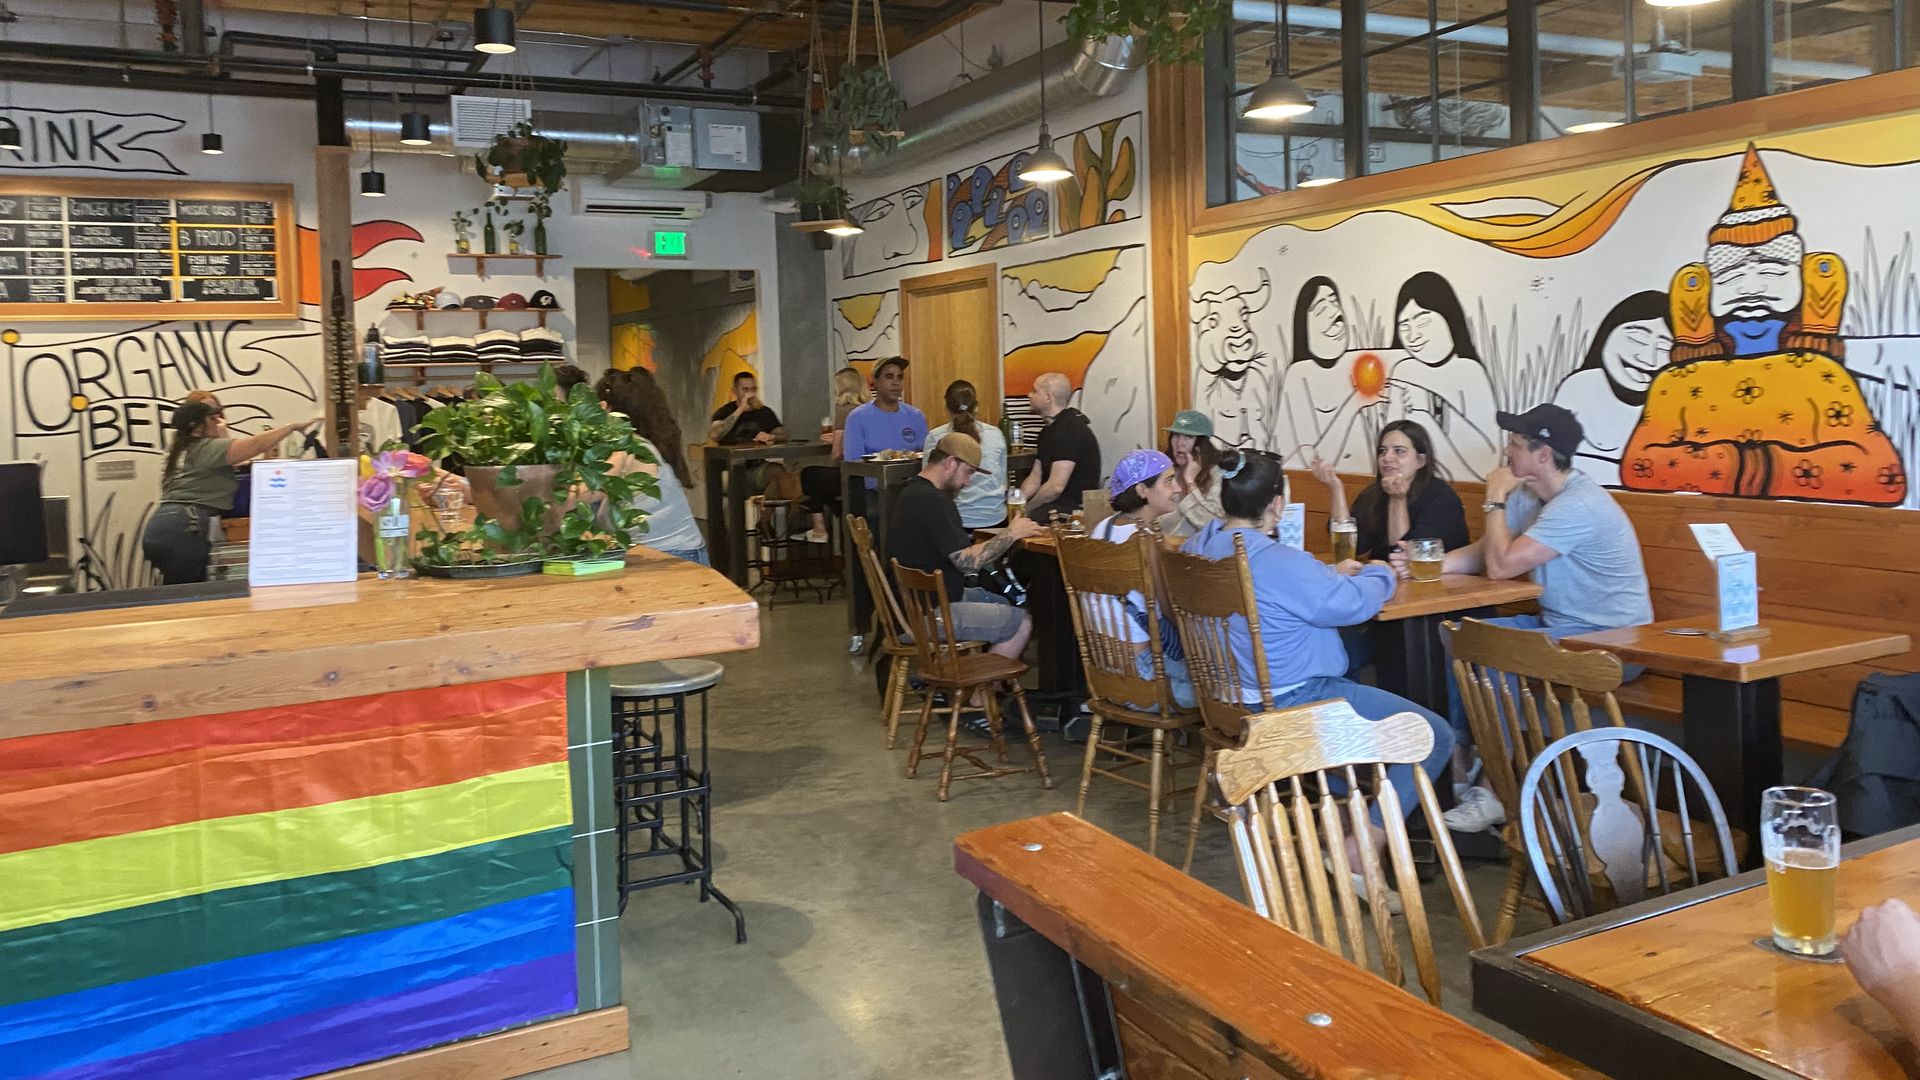 A room with tables and people sitting at them, with murals on the walls and a pride flag at the end of a bar.